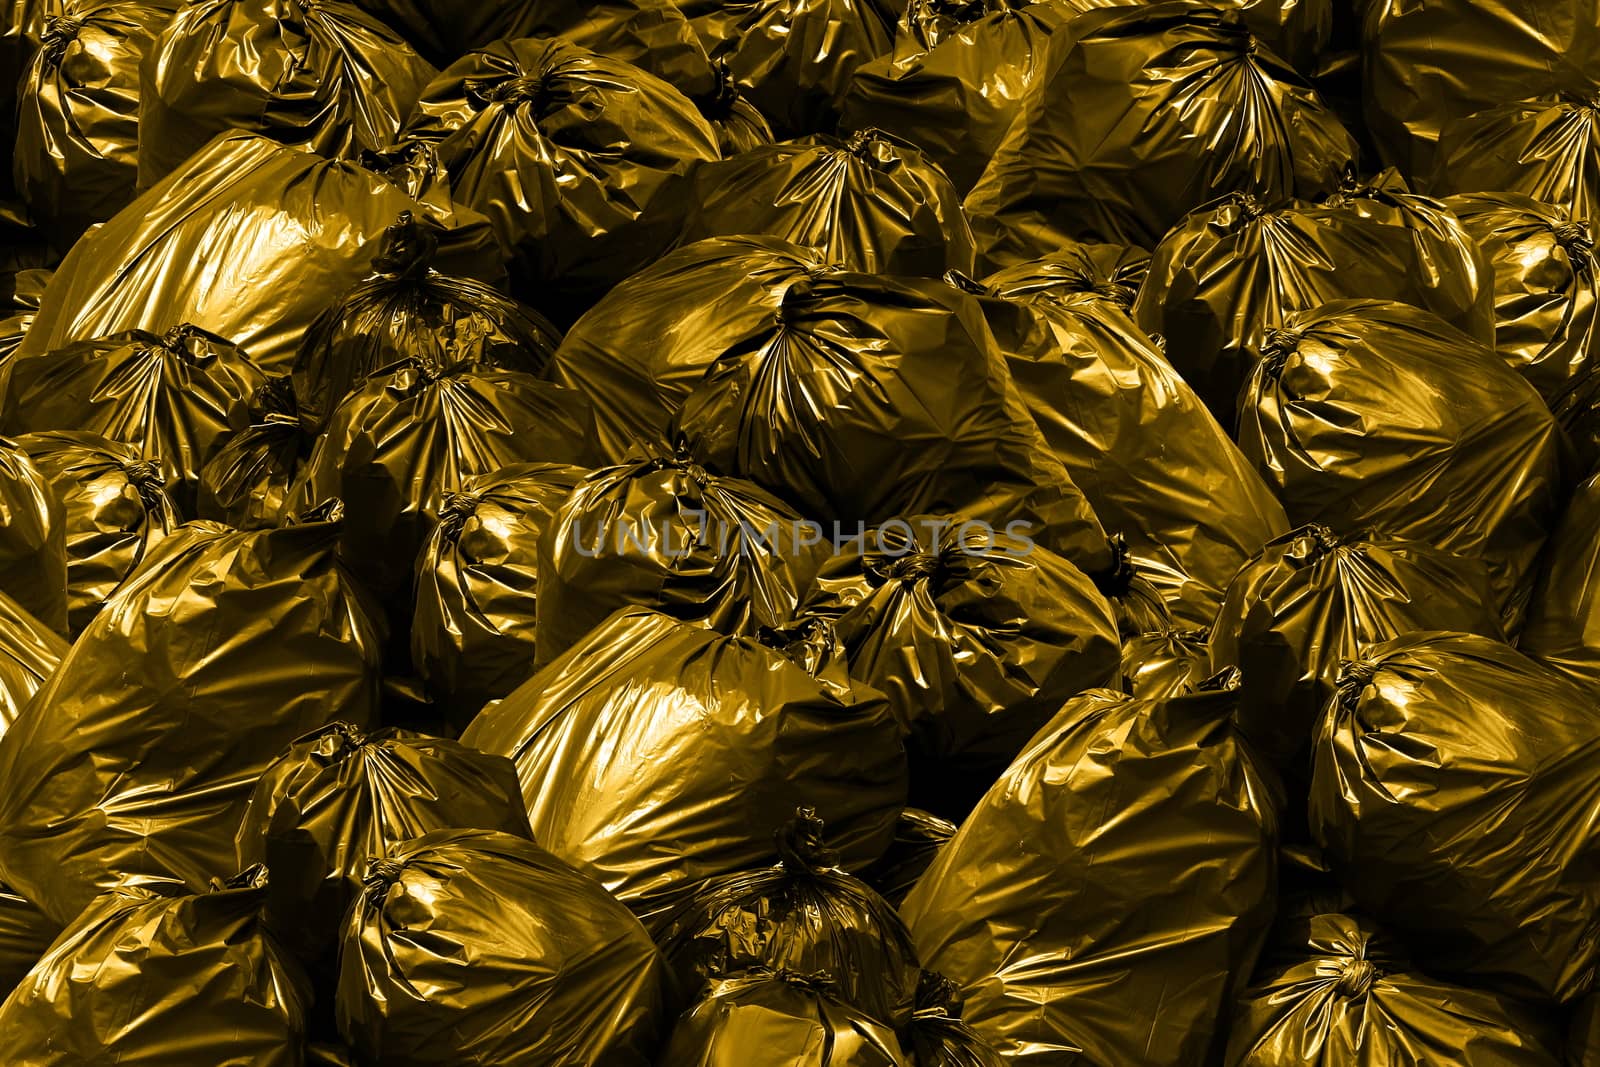 Bag plastic waste, Background garbage dump Pollution Garbage bags with yellow and gold, Bin,Trash, Garbage, Rubbish, Plastic Bags pile